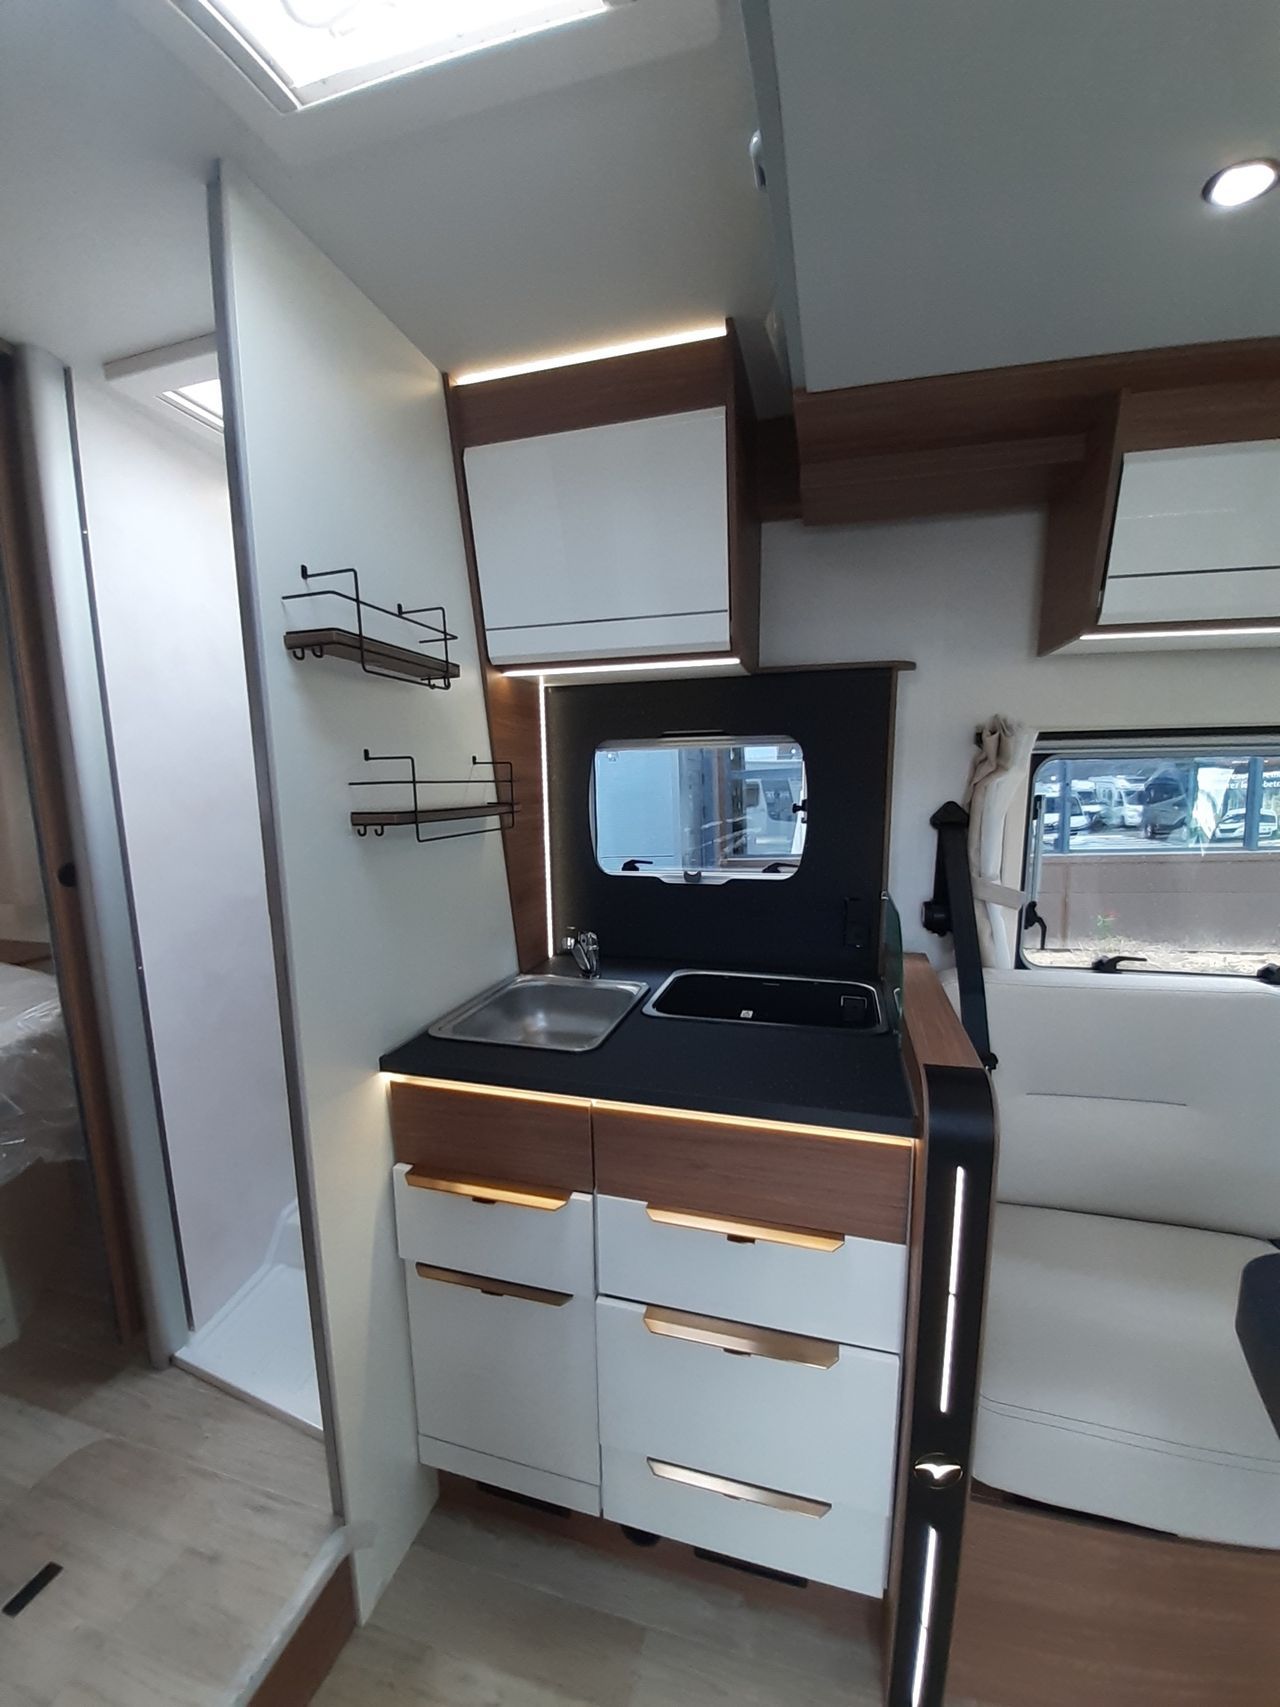 Camping-car - Pilote - P726 FC EVIDENCE 2 000€ D'ACCESSOIRES OFFERTS - 2024